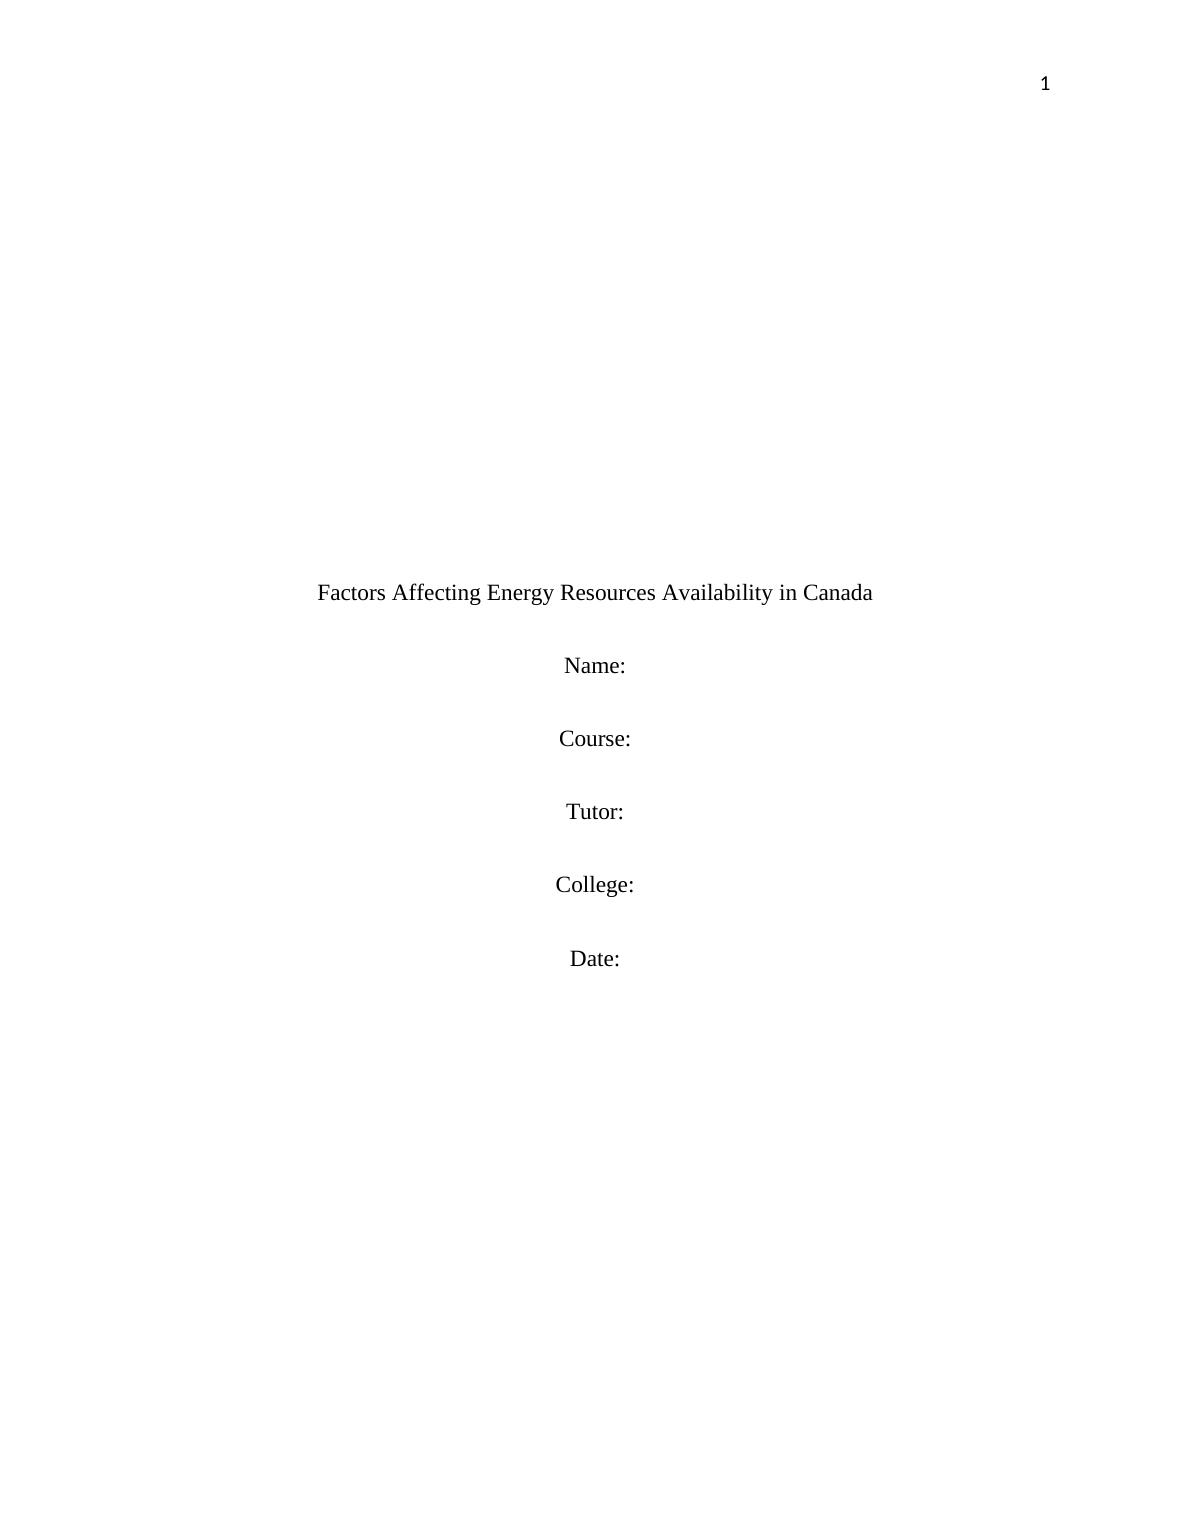 Factors Affecting Energy Resources Availability in Canada_1